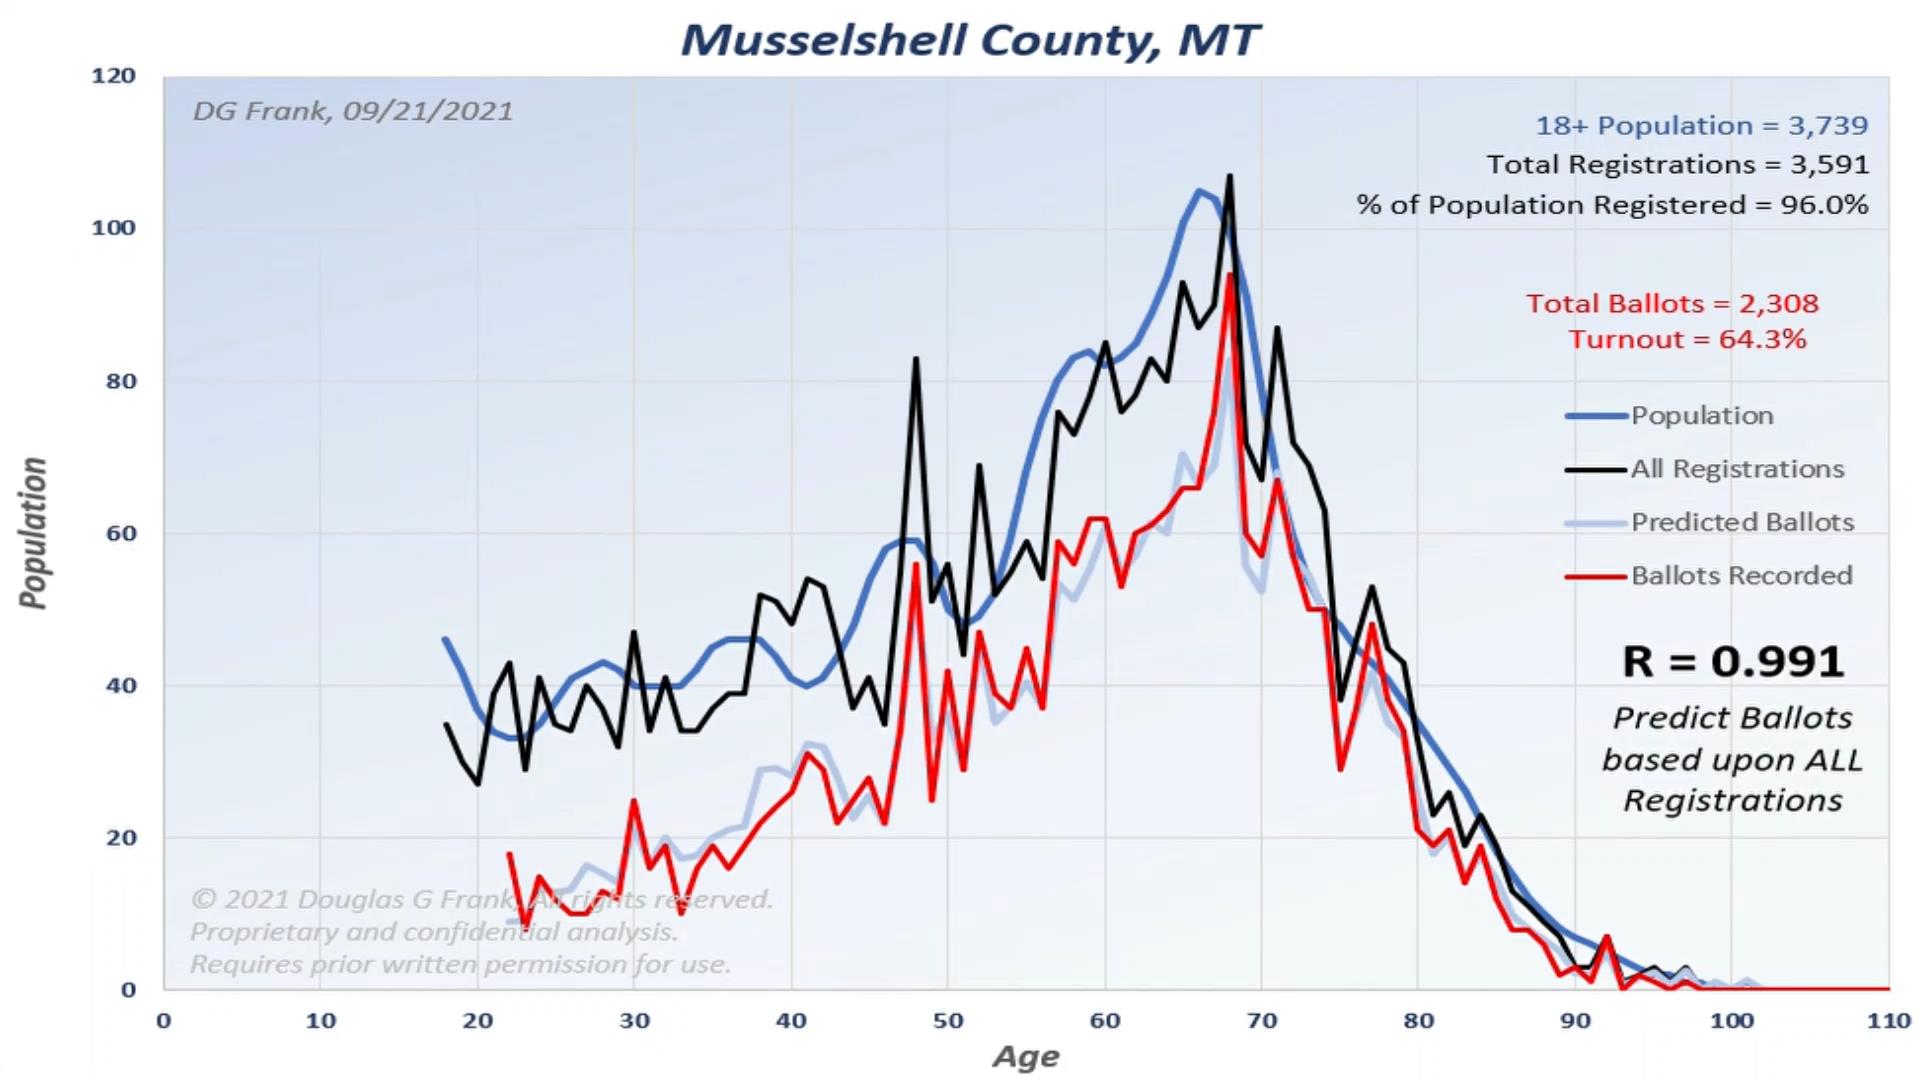 Musselshell County 2020 Election Analysis Chart by Dr. Doug Frank